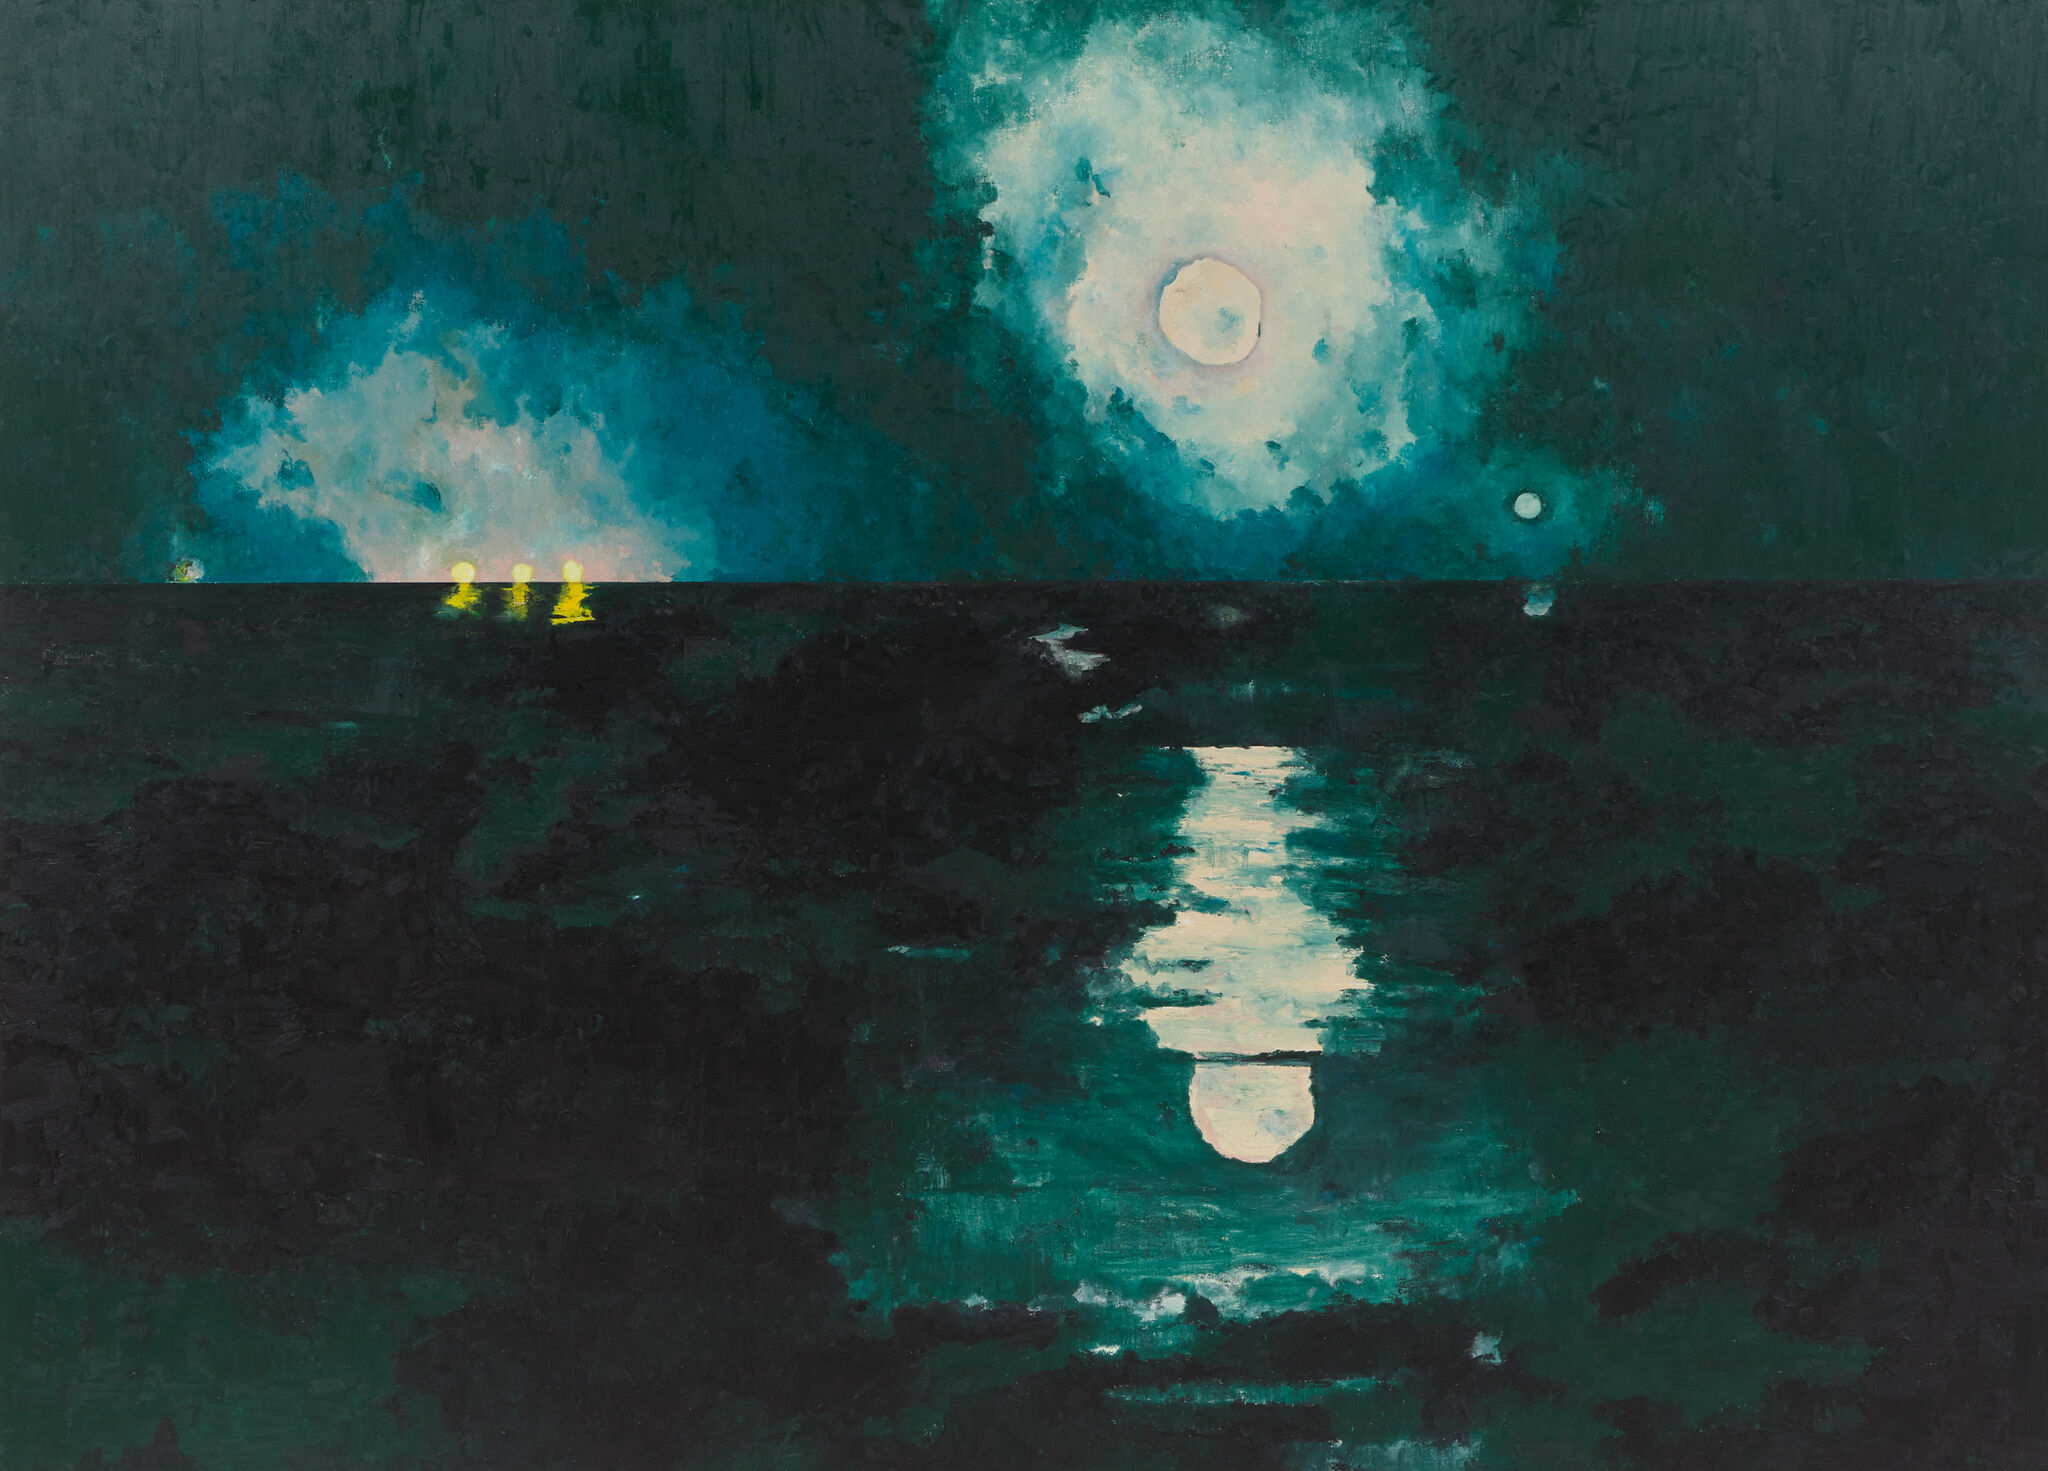 A blue-green night sky reflecting a white moon on a vast blue-green body of water with three yellow lights in the distance to the left, also reflecting on the water.